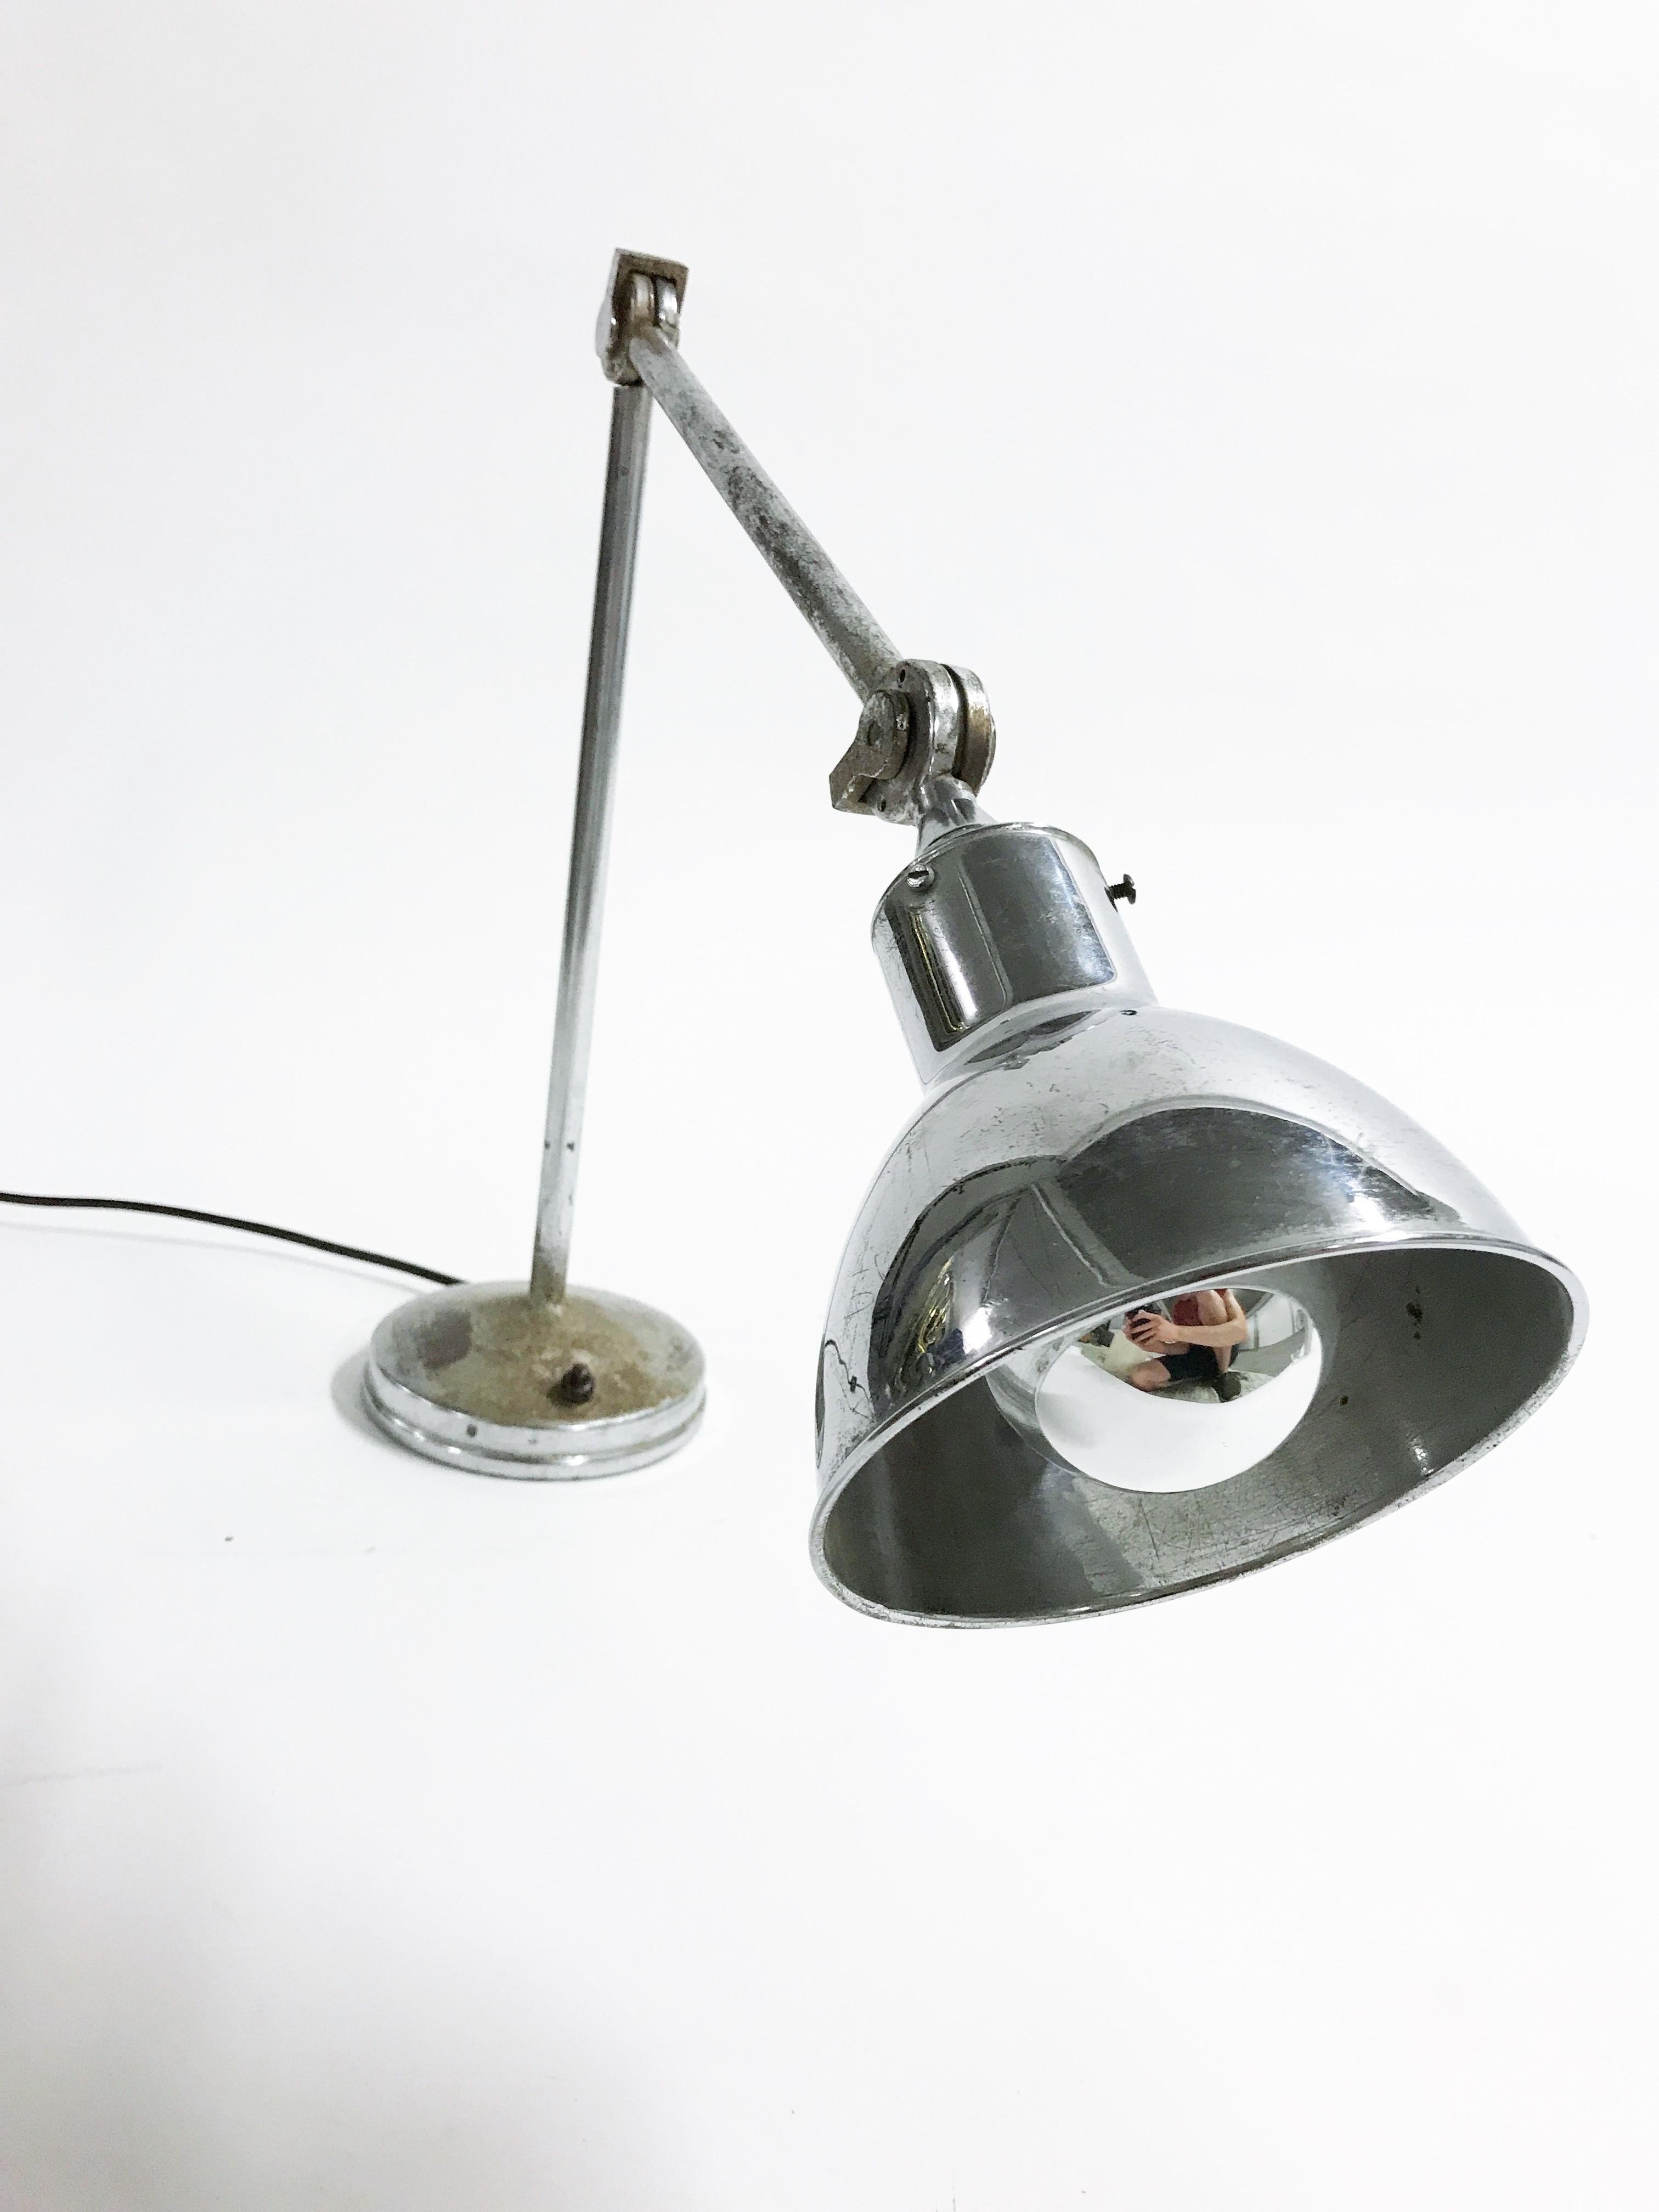 Large chrome machinist or work light.

The lamp has an articulated arm and lamp shade, making it very adjustable.

This was used in old factories on work benches etc.

AGI was a small Belgium based company producing industrial lighting in the